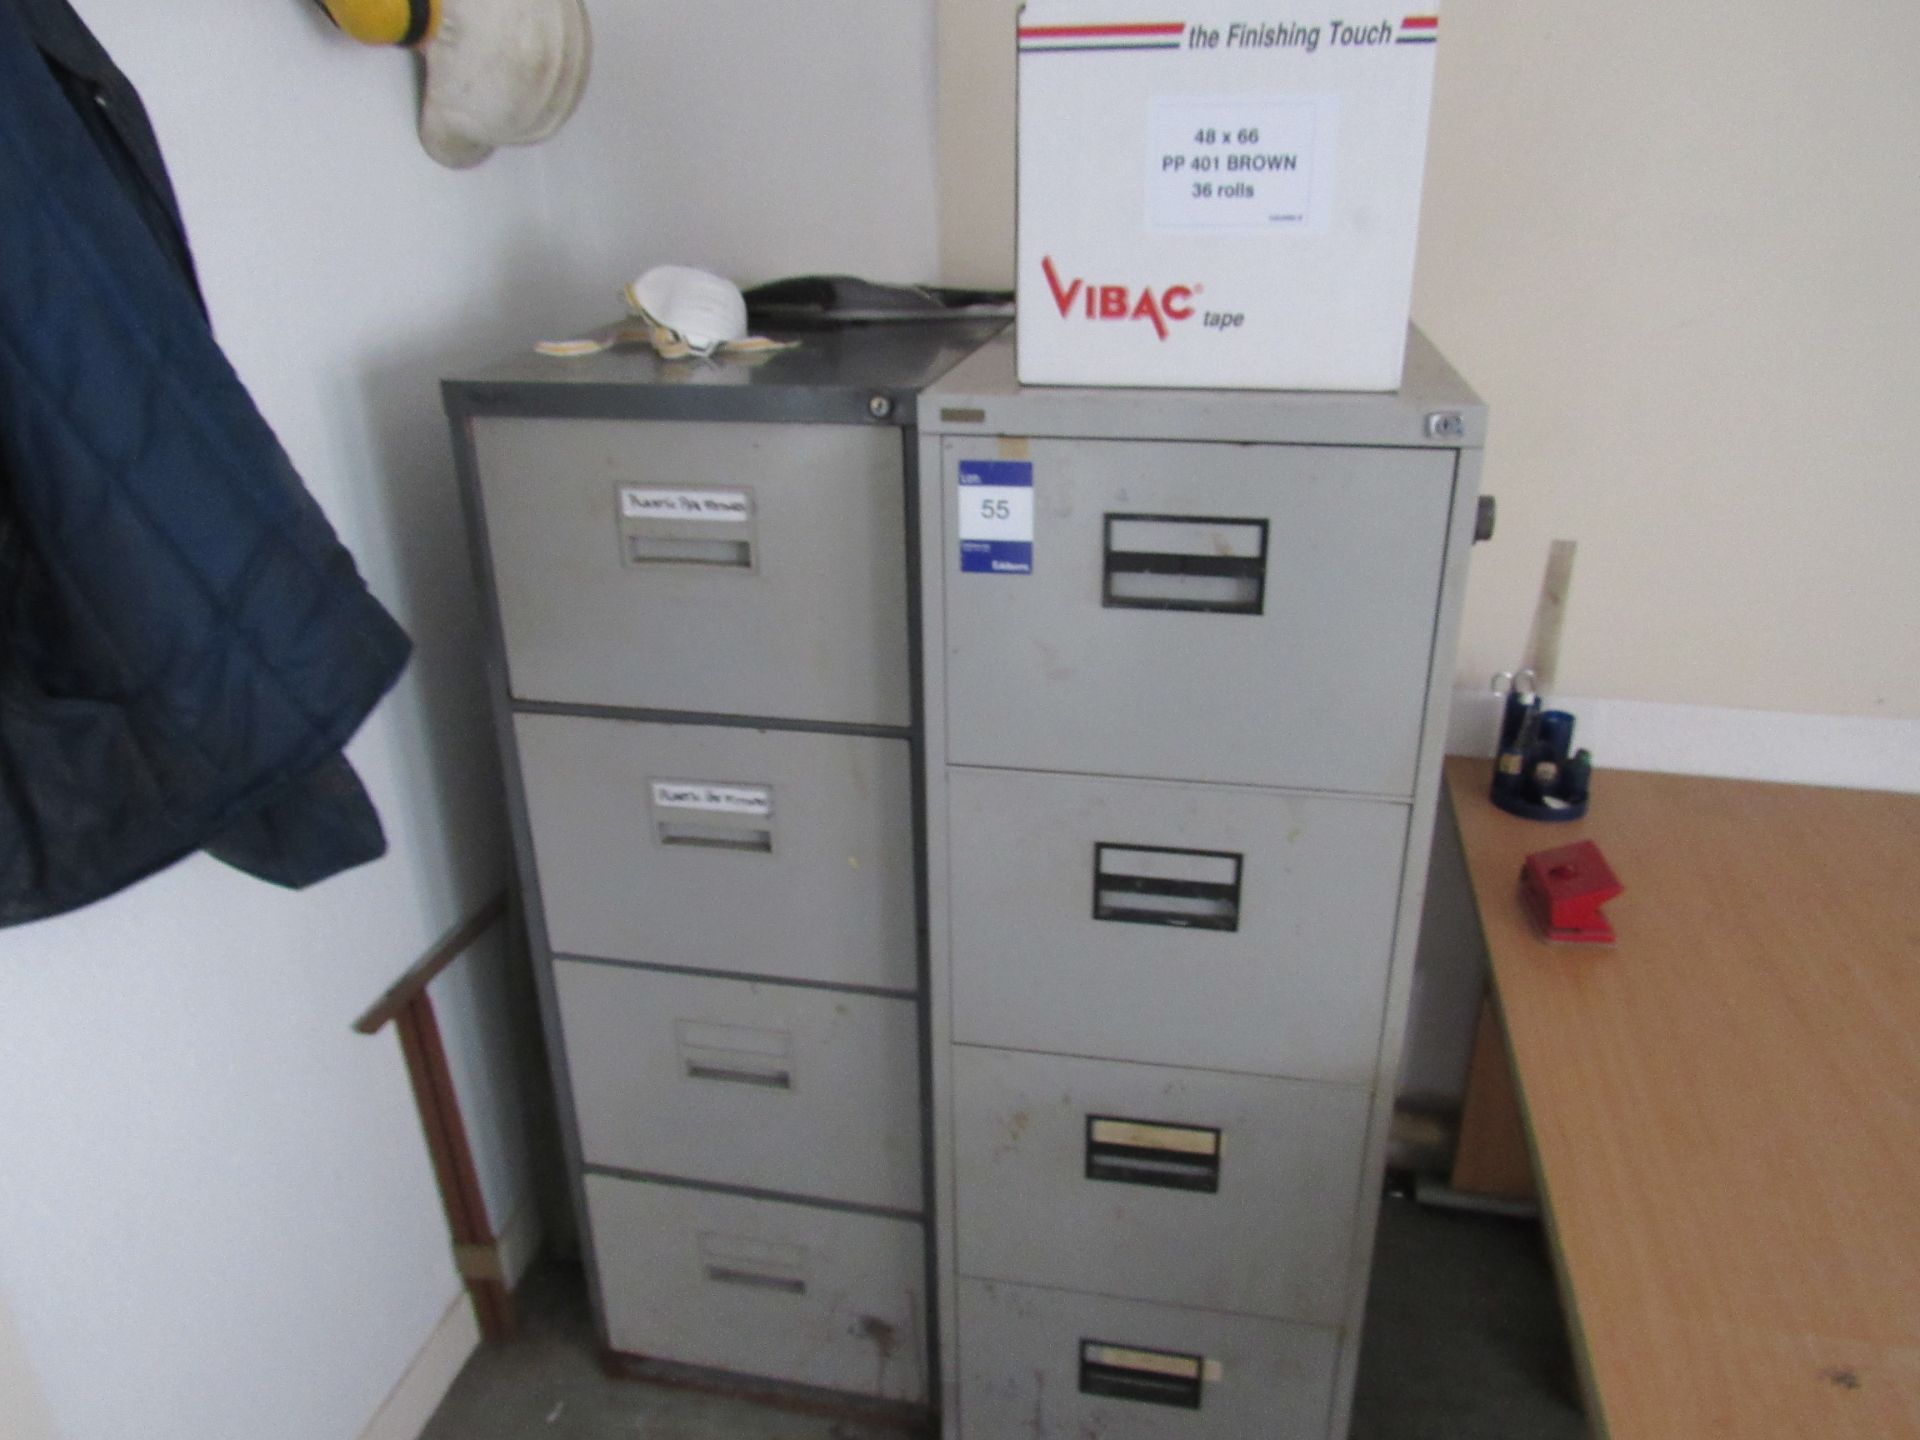 2 4 Drawer Filing Cabinet and Contents - Located on the first floor. The only removal access for